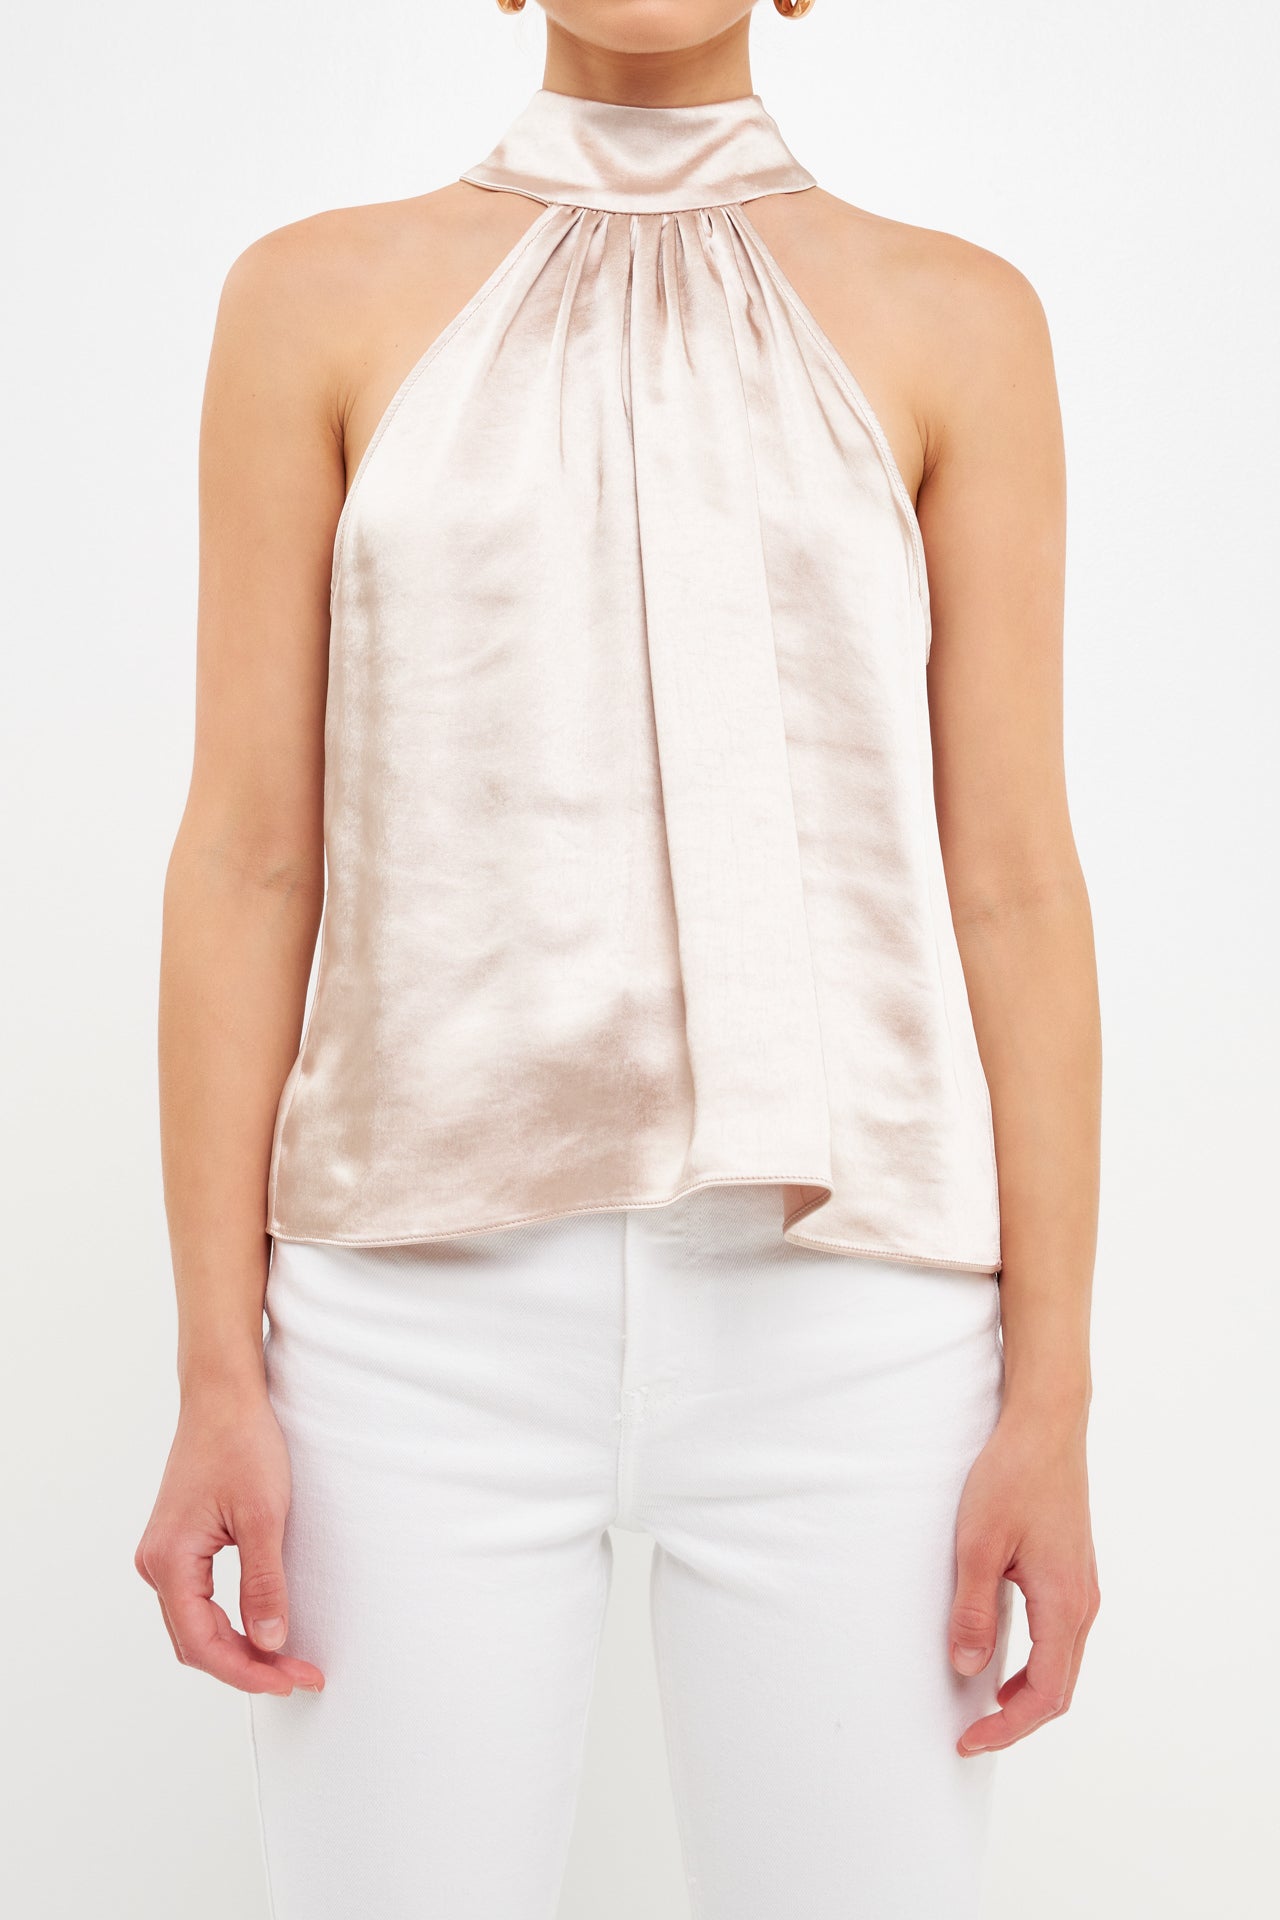 ENDLESS ROSE - Satin Top - TOPS available at Objectrare